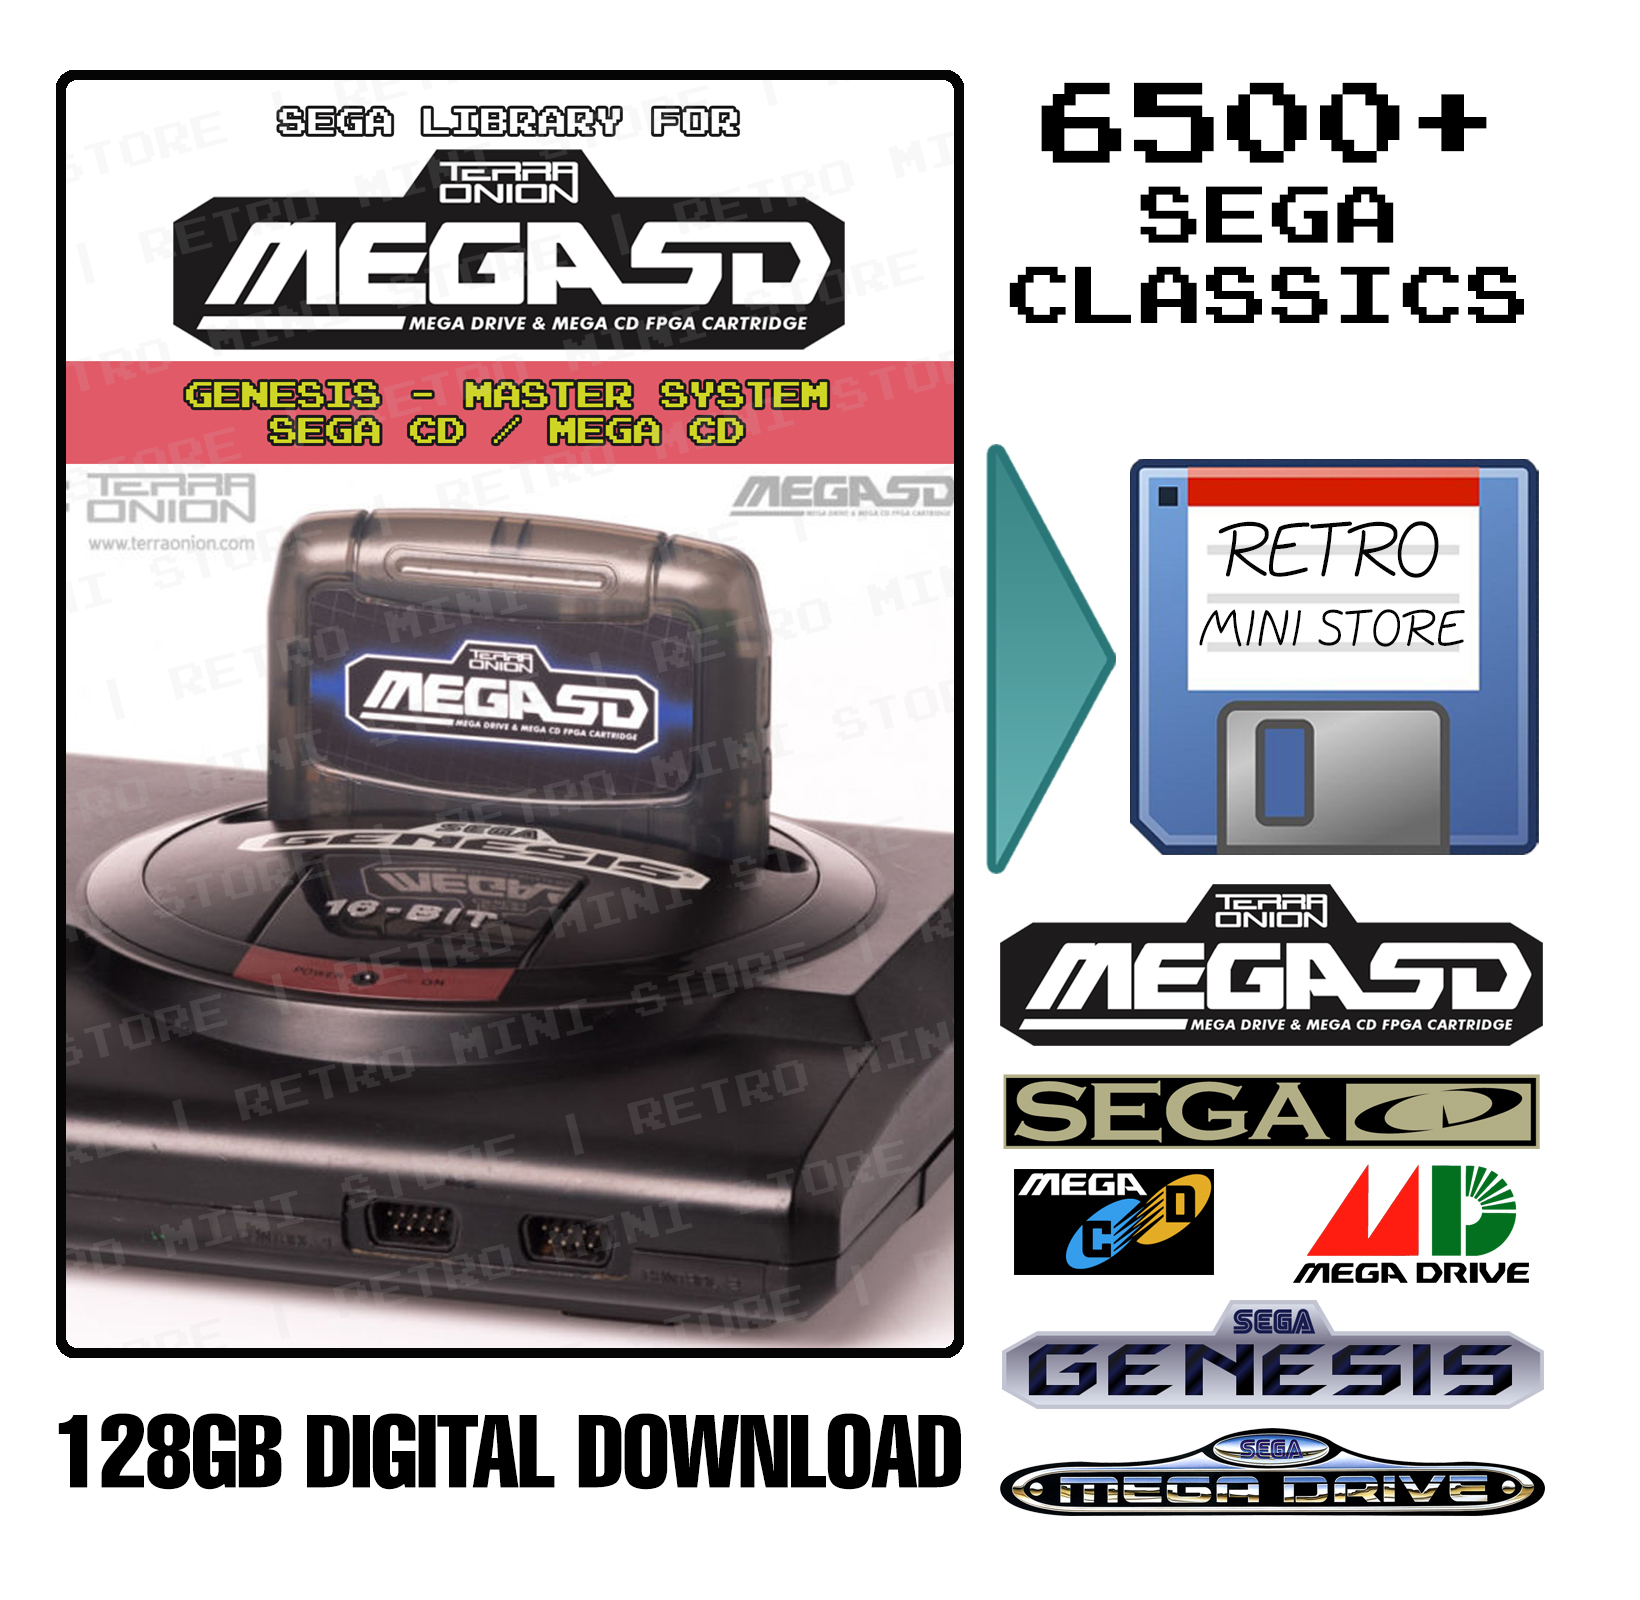 Digital Download Onion MEGA SD Pre-loaded microSD with Complete Library - 9500+ Games Included - RetroMini Store